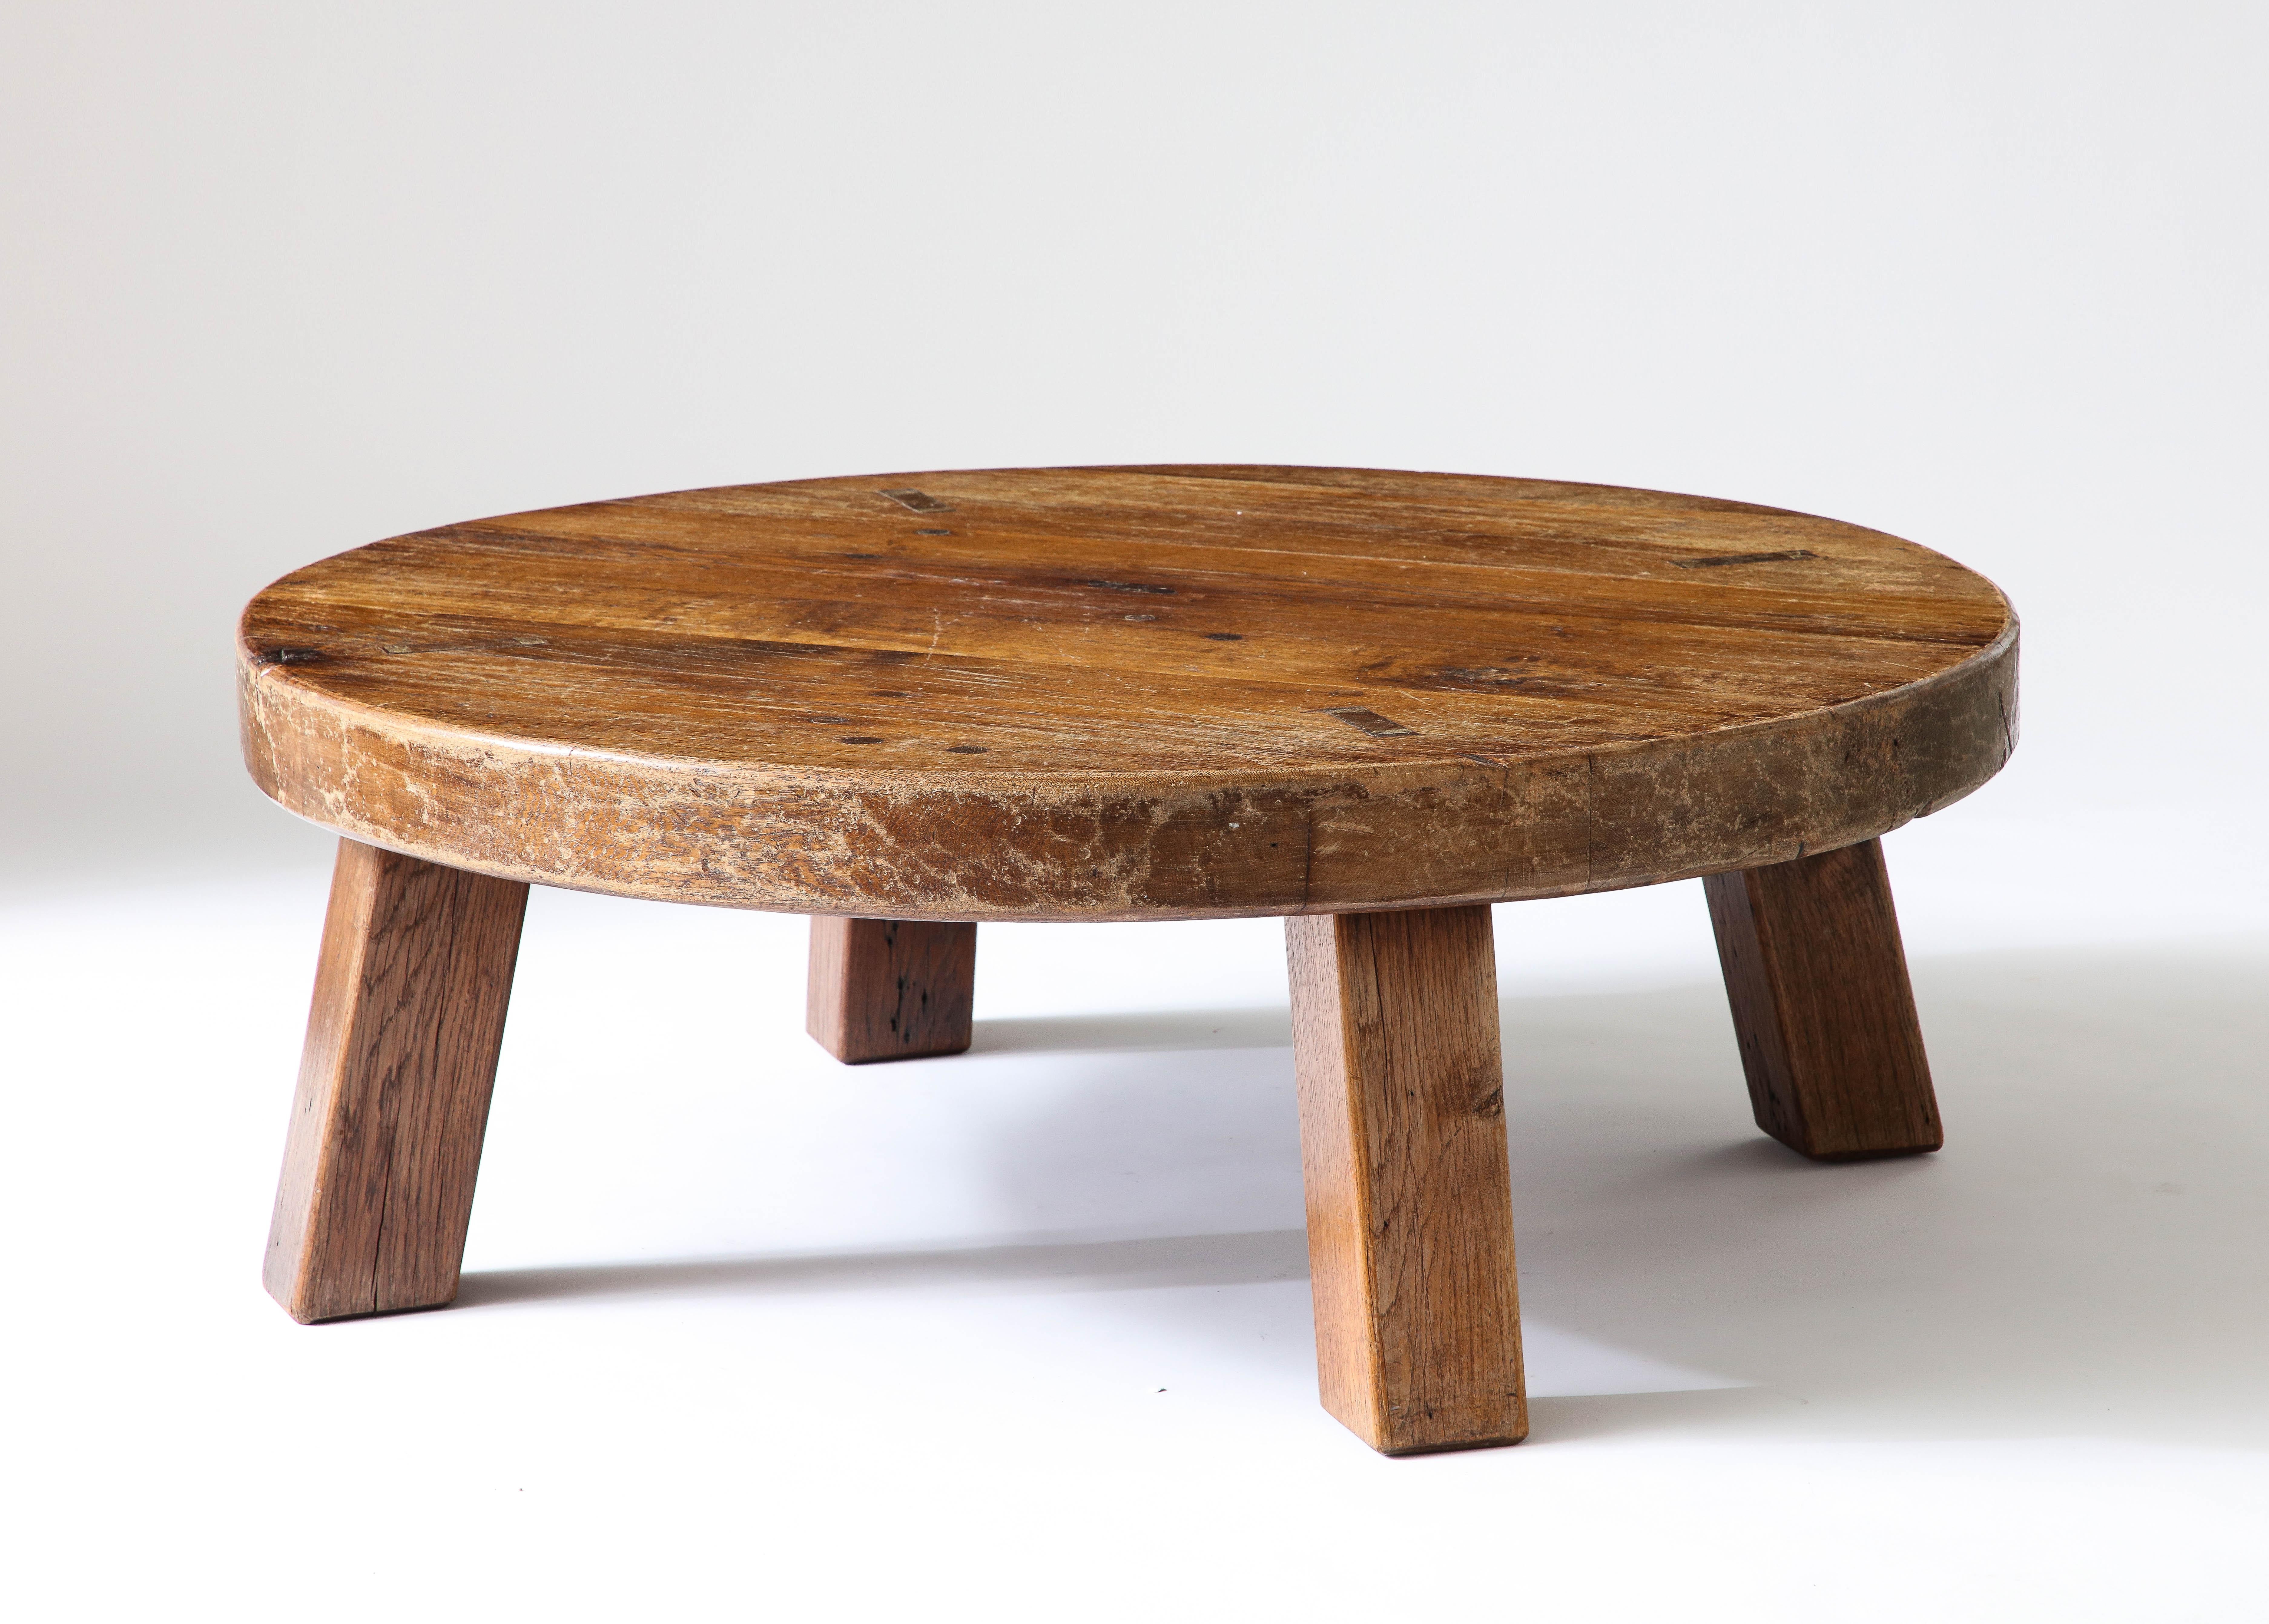 Monumental, rustic center table with exposed joinery.